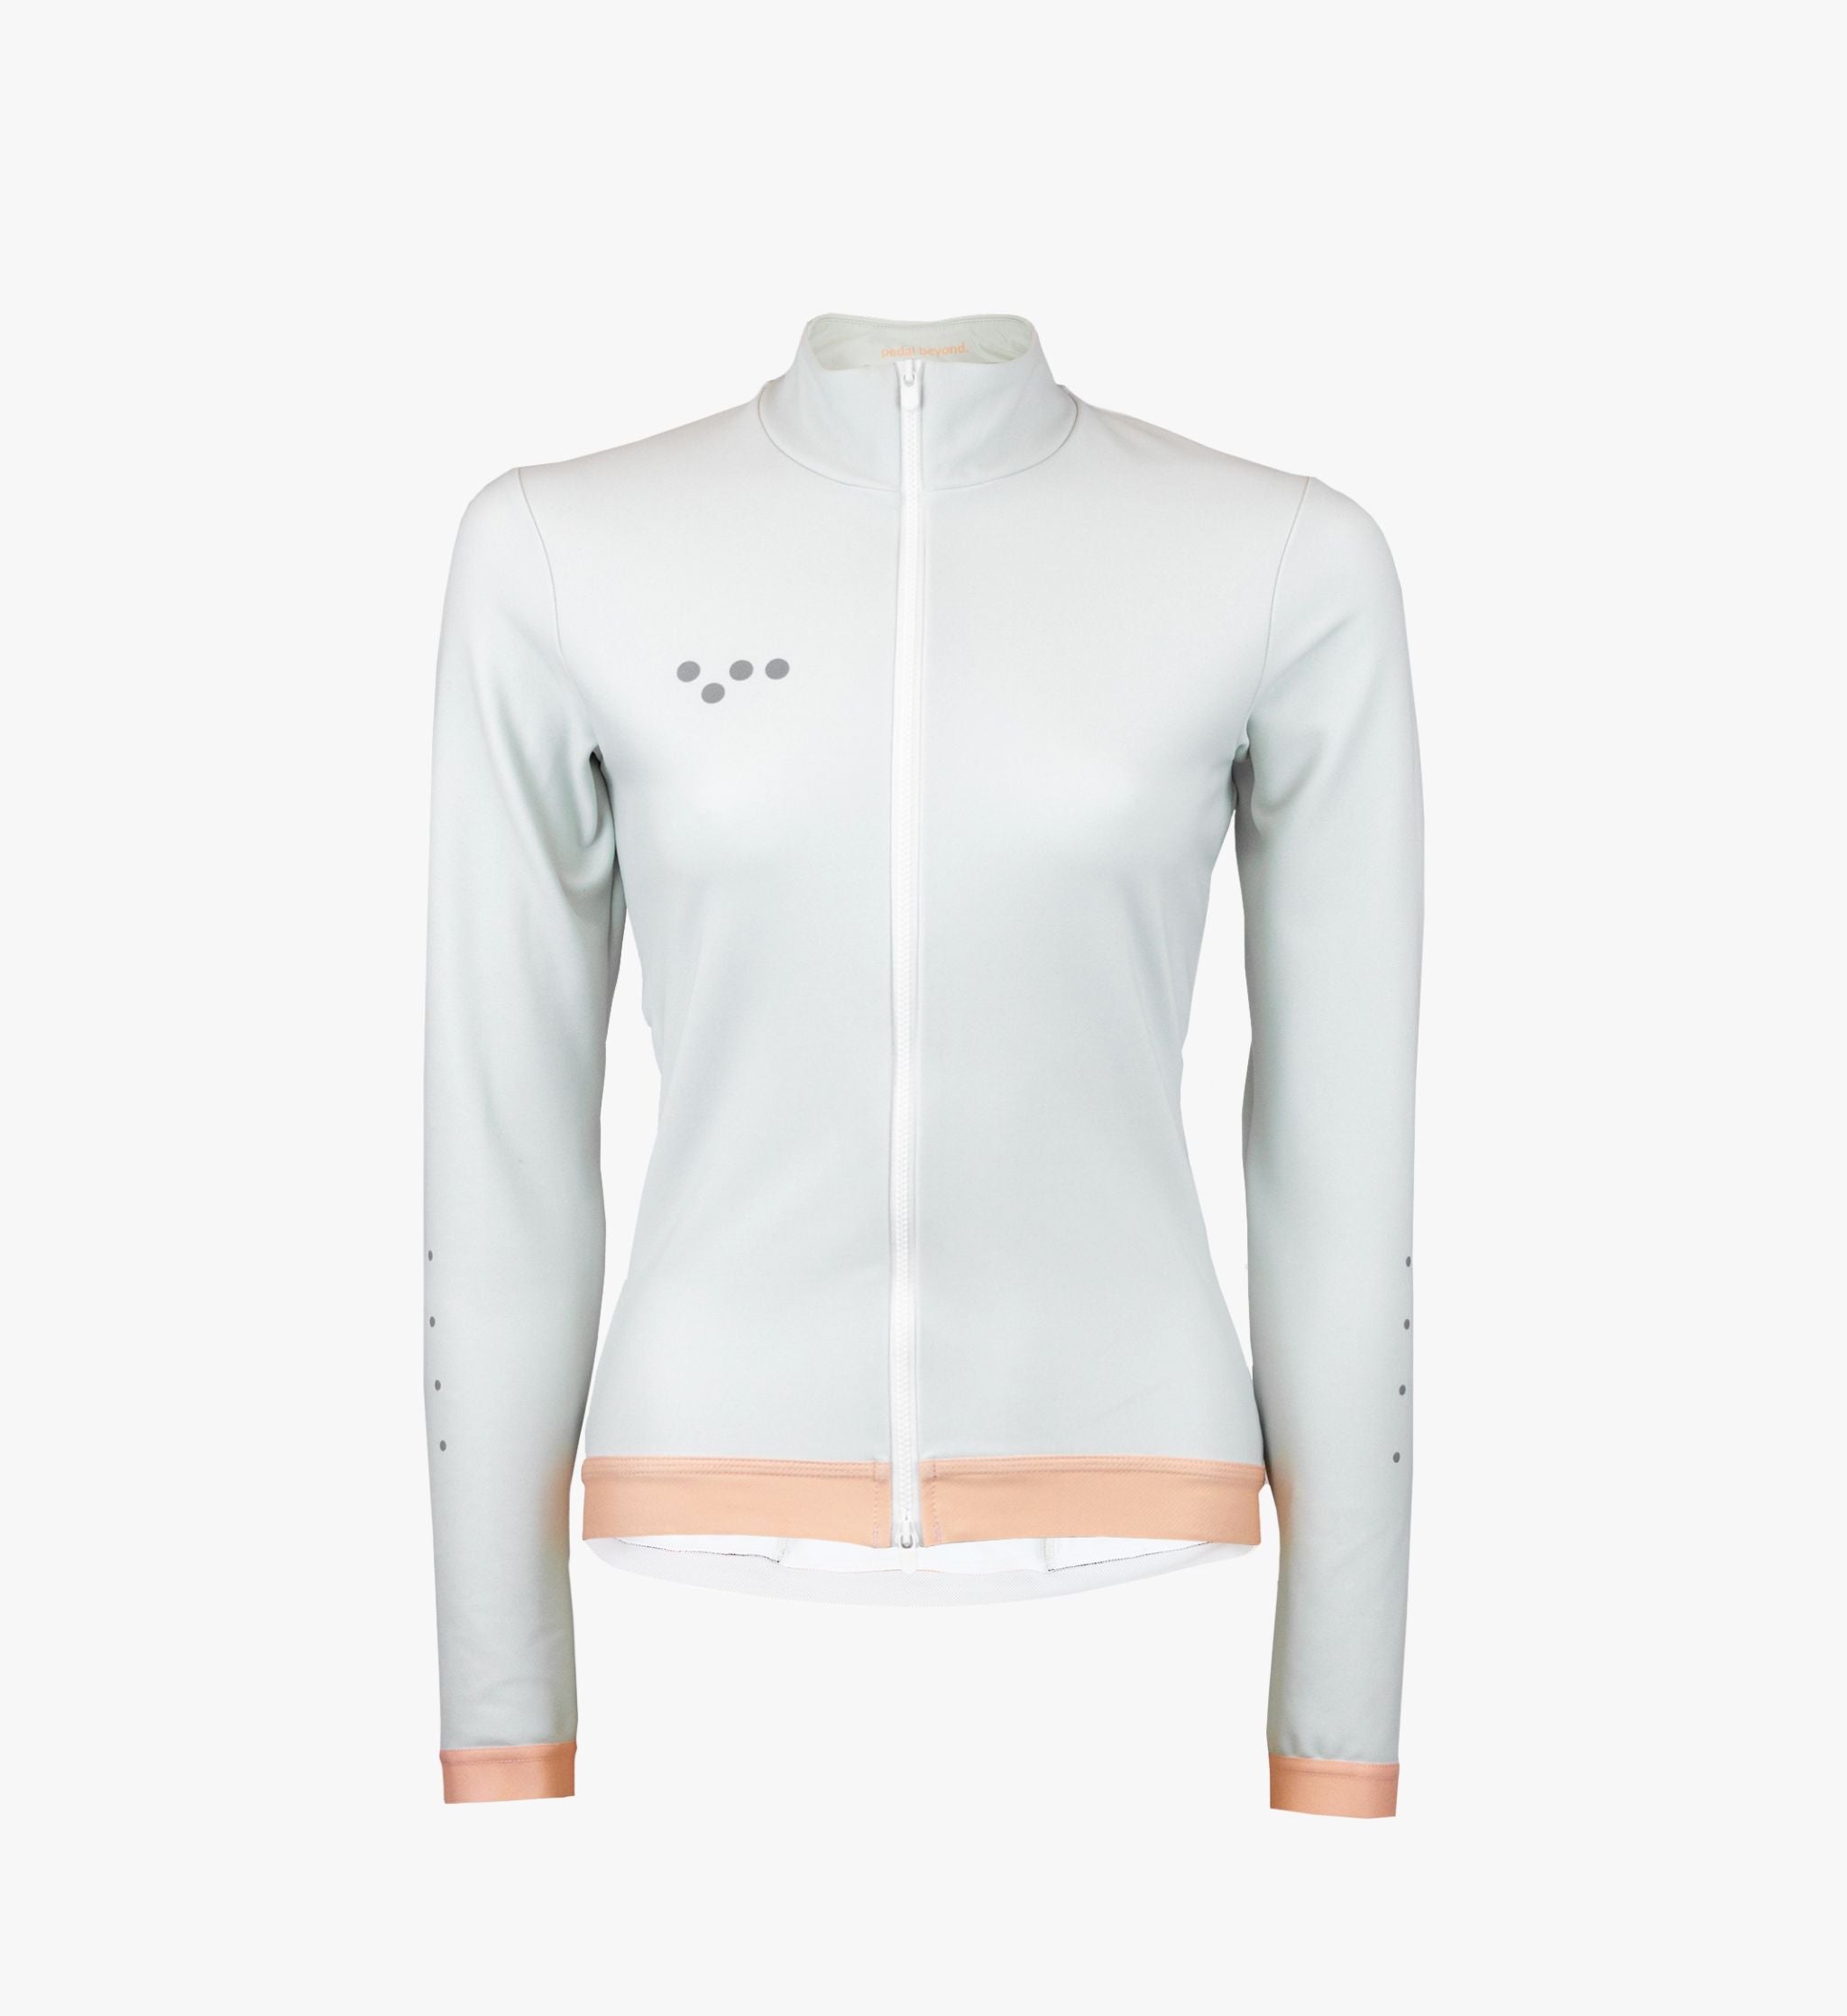 Elevate Elements Thermal Long Sleeve Jersey